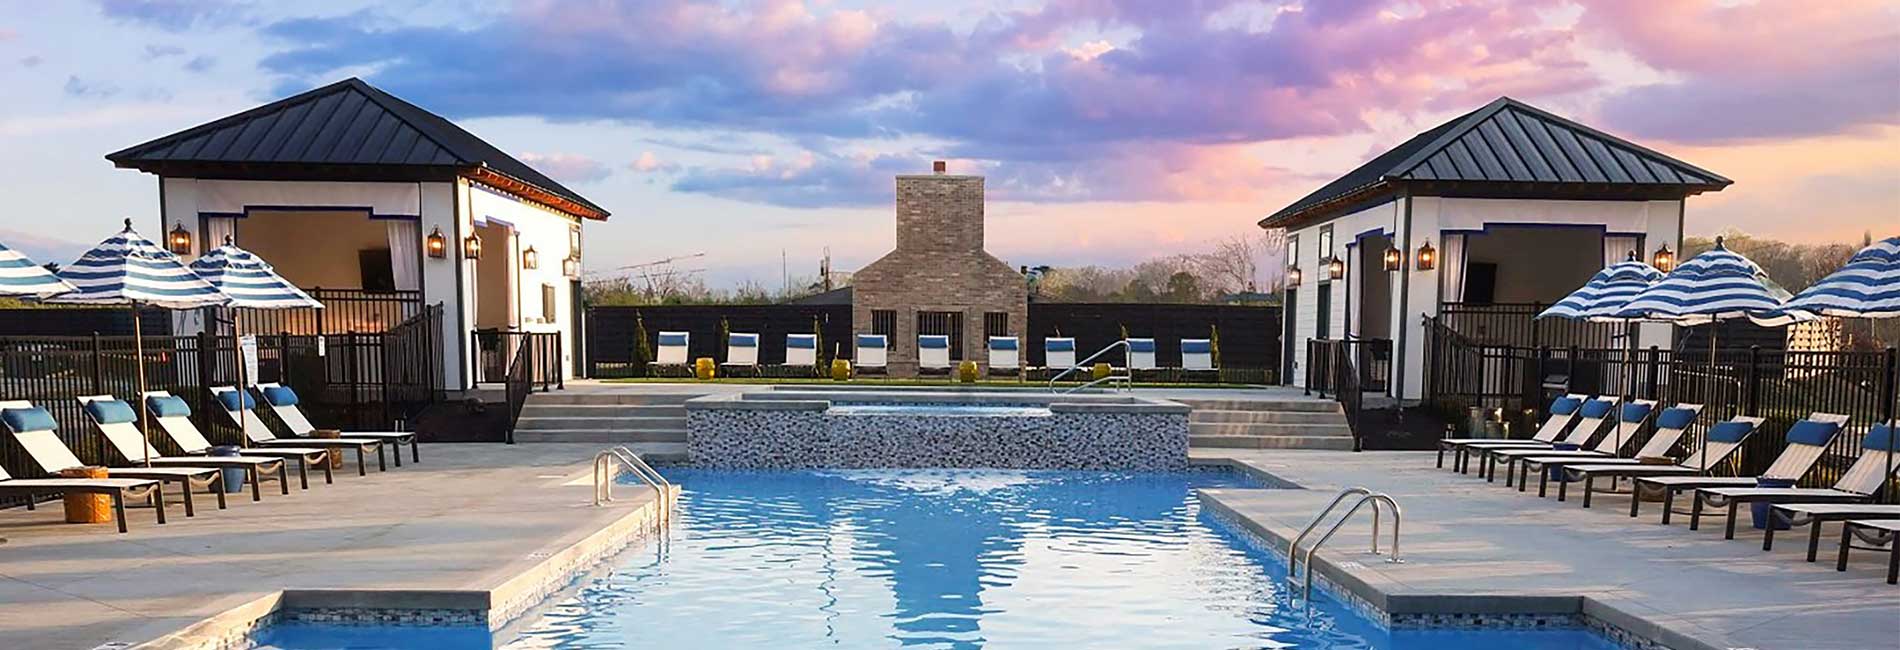 Belmont House Apartments with Resort-style Swimming Pool